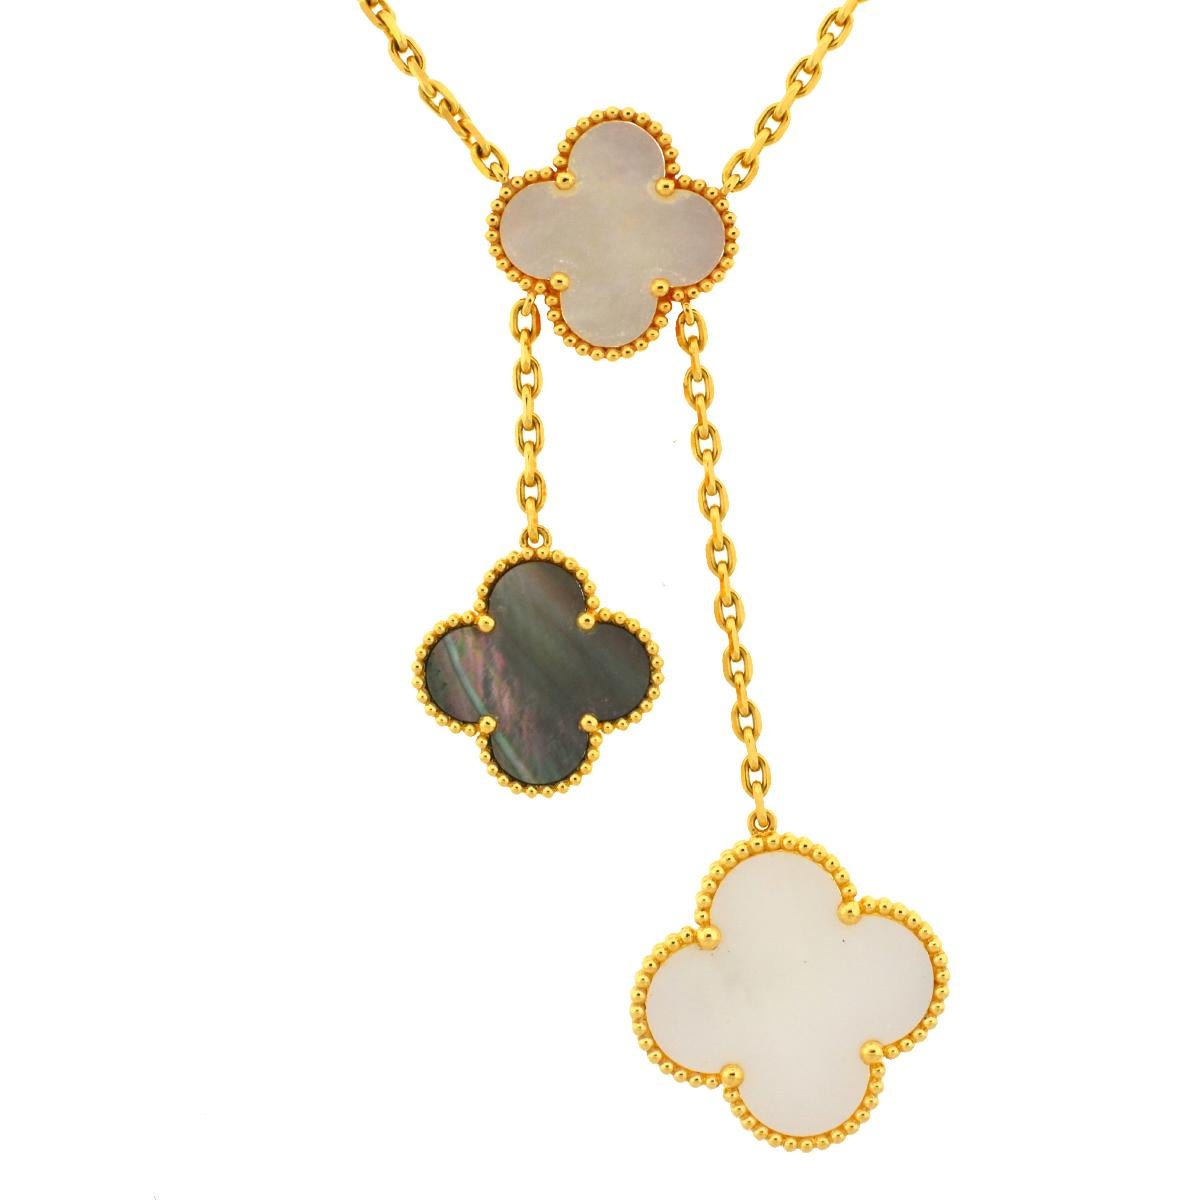 Company - Van Cleef & Arpels
Style - Magic Alhambra 6 Motif Necklace 
Metal - 18k Yellow Gold
Length - 16.5